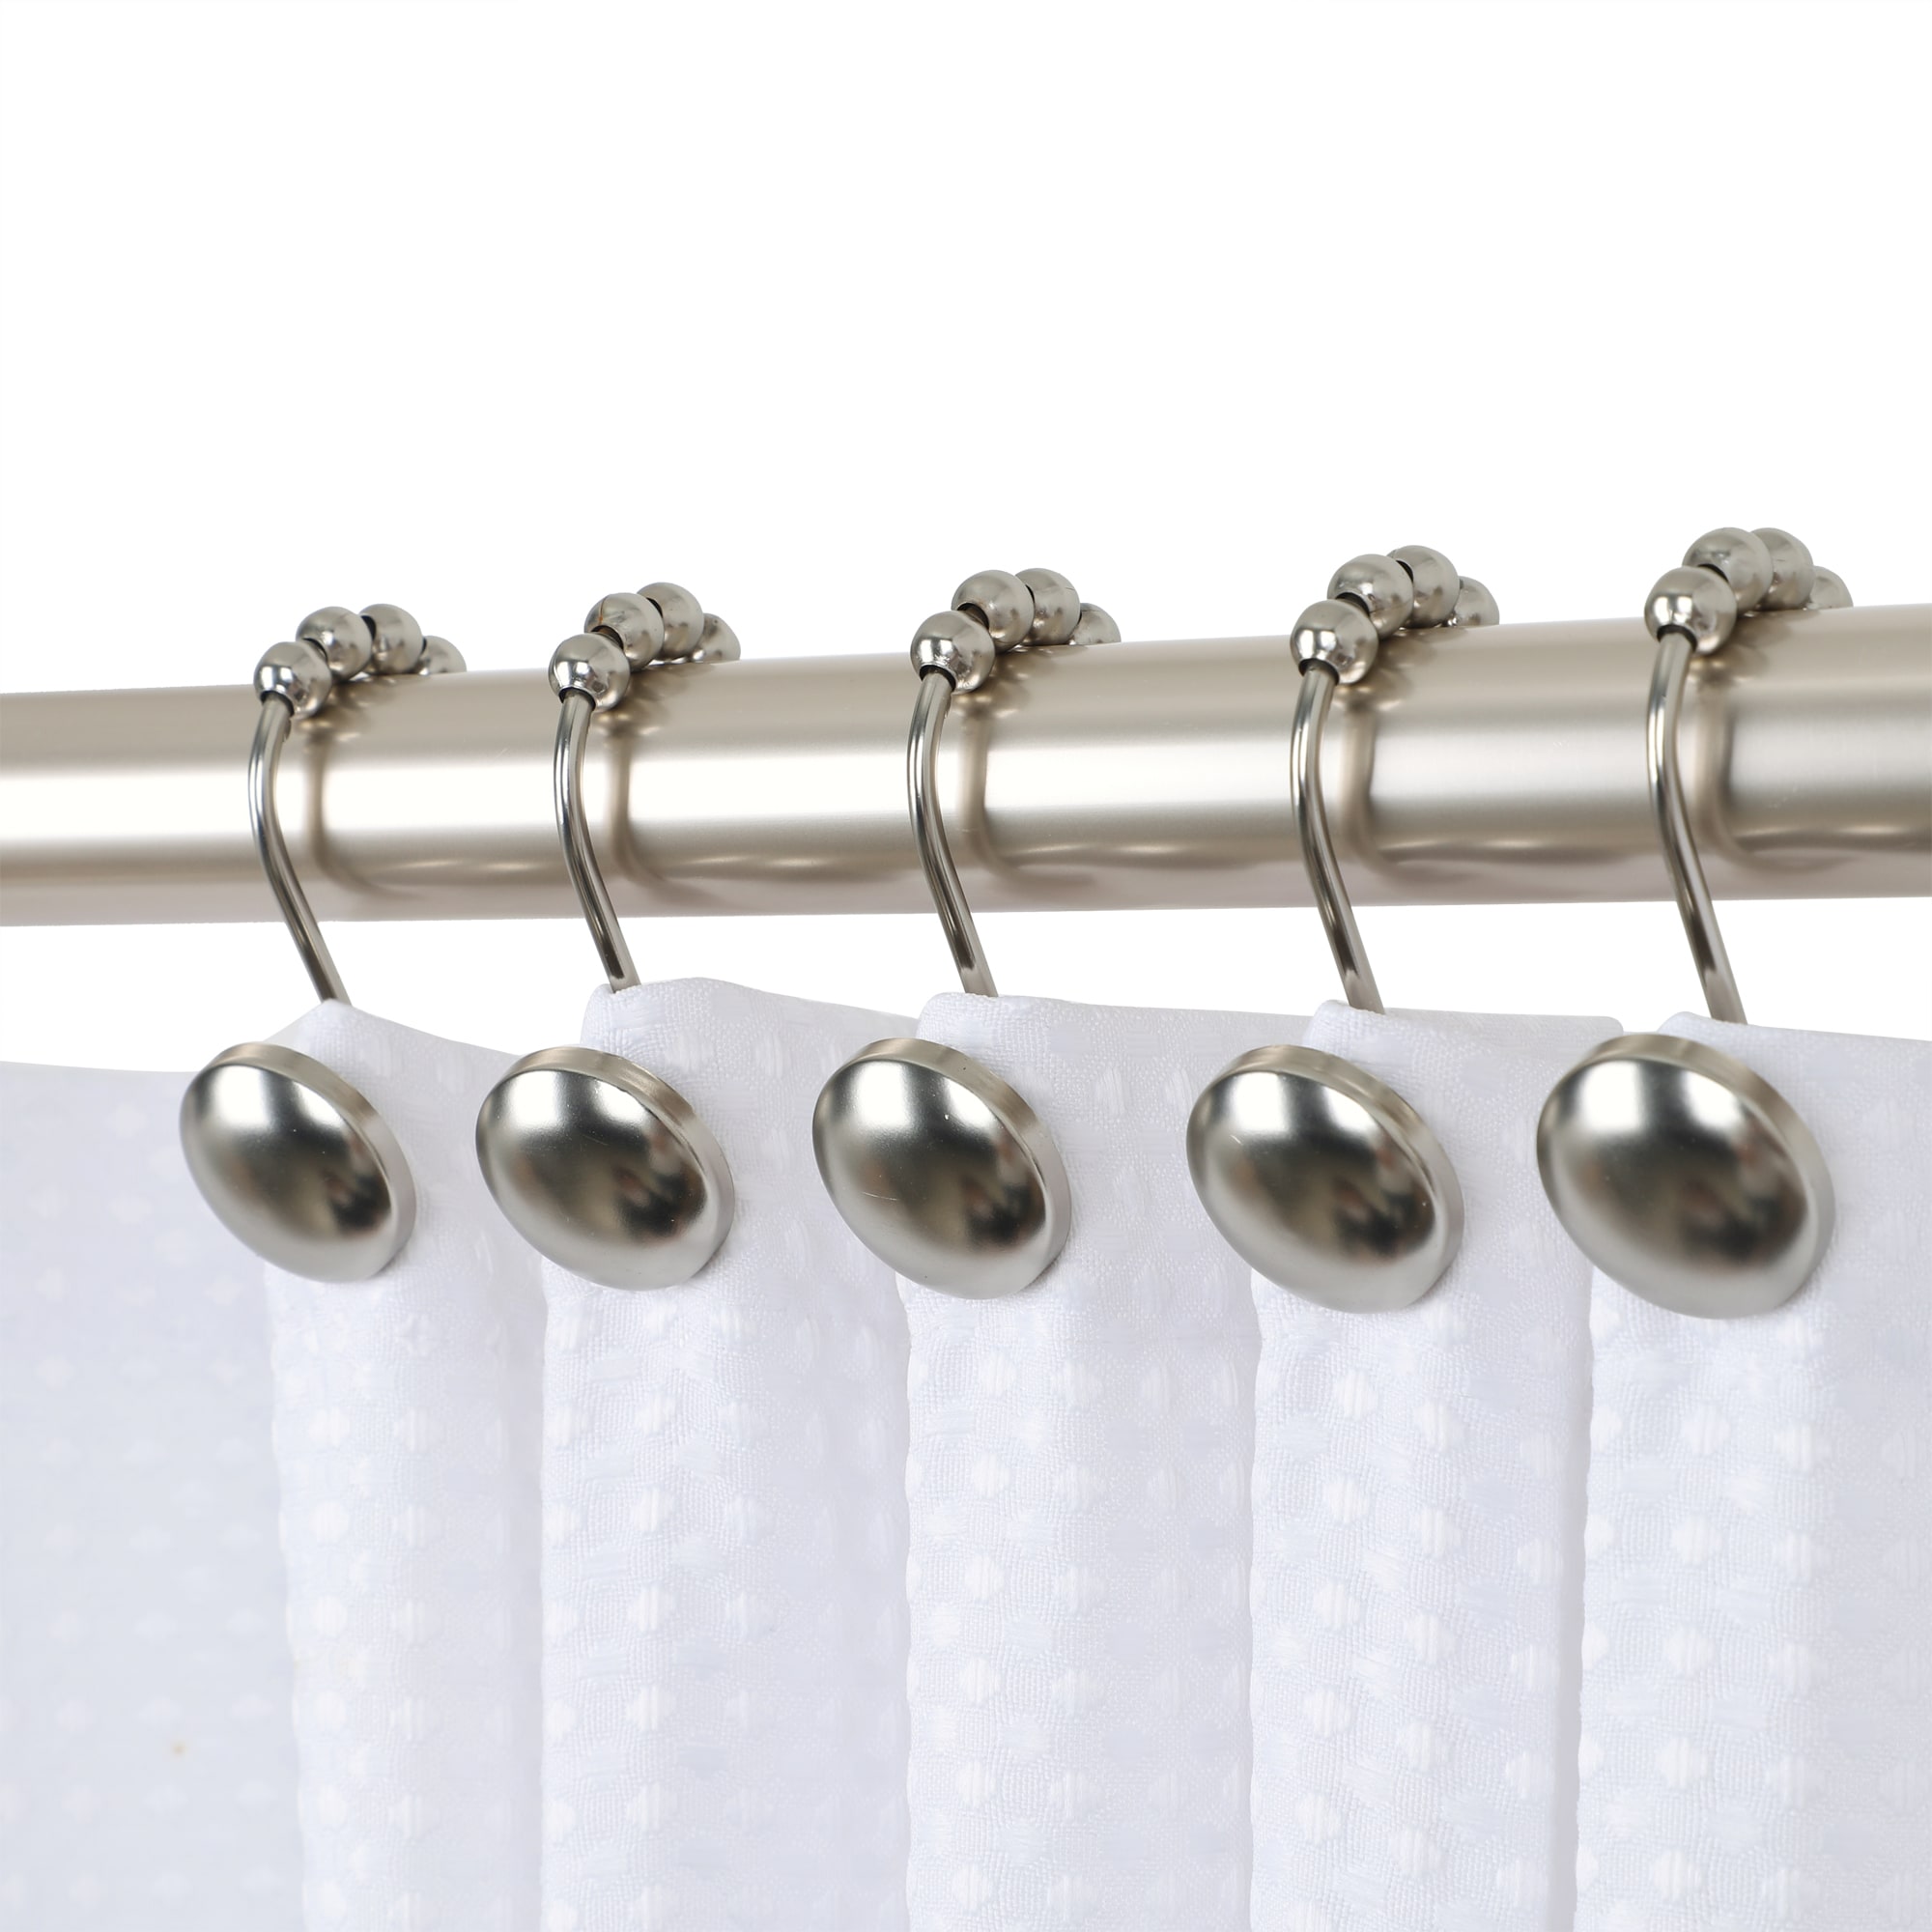 Rather Be Fishing Shower Curtain Hooks (Set of 12)  Novelty shower  curtains, Shower curtain hooks, Shower curtain